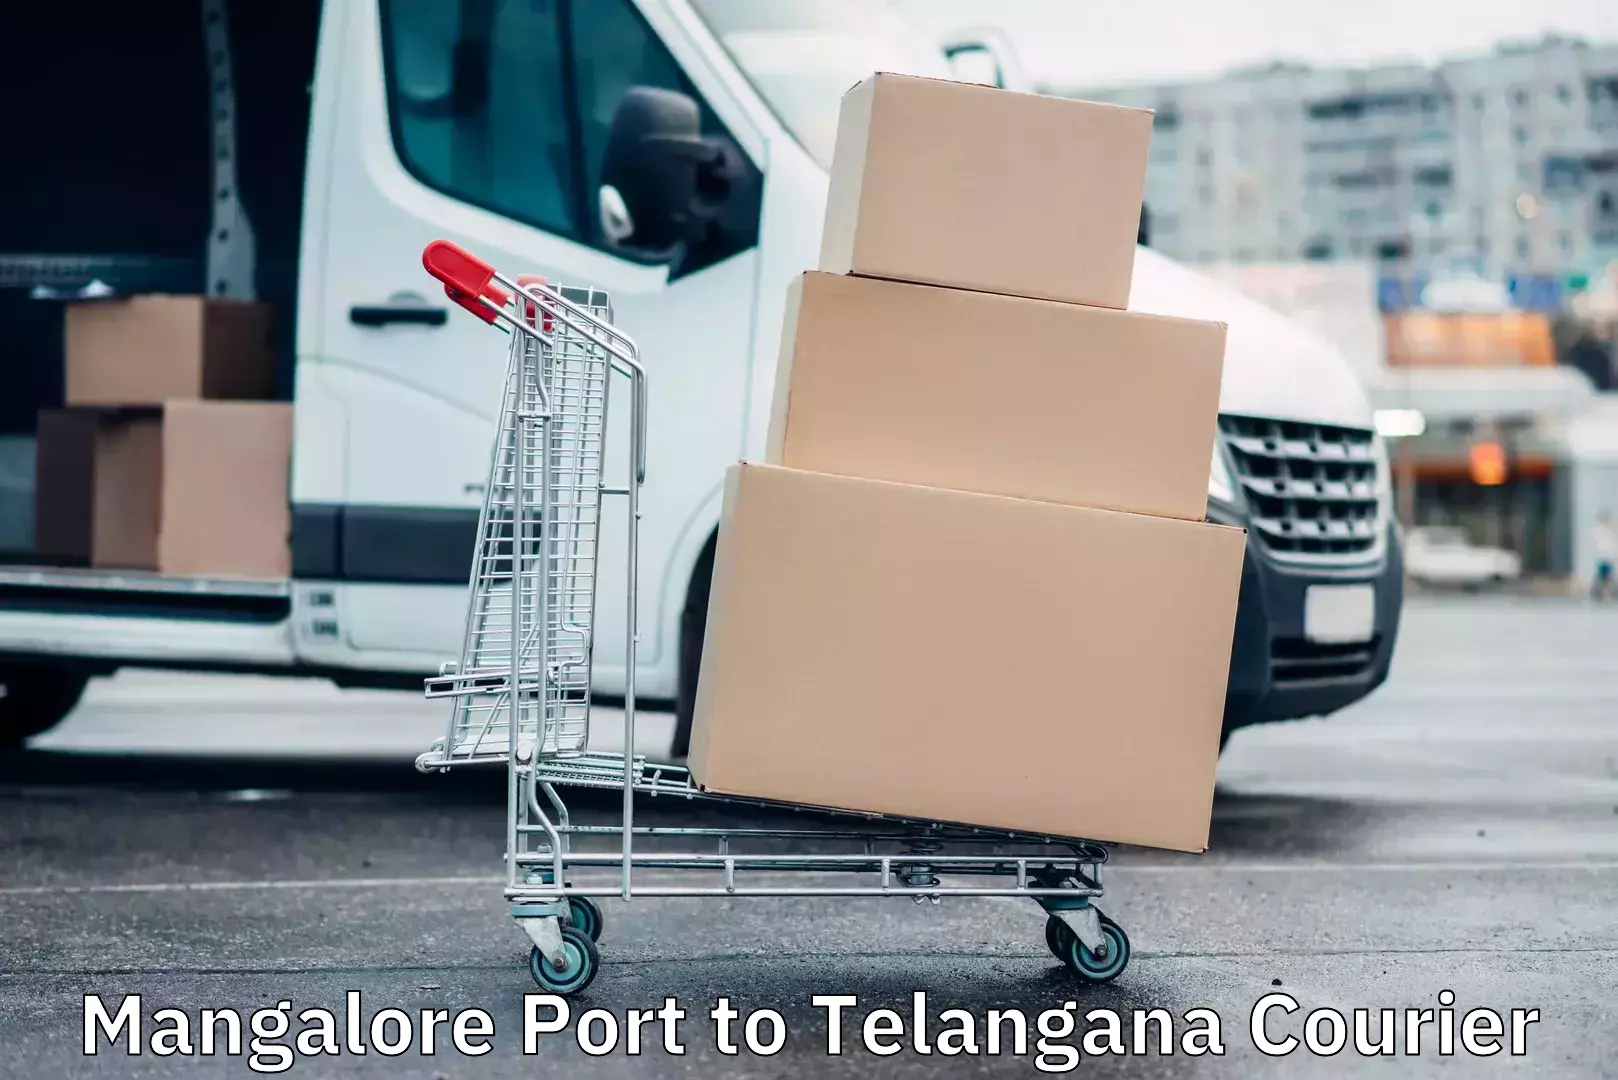 Express courier facilities in Mangalore Port to Telangana